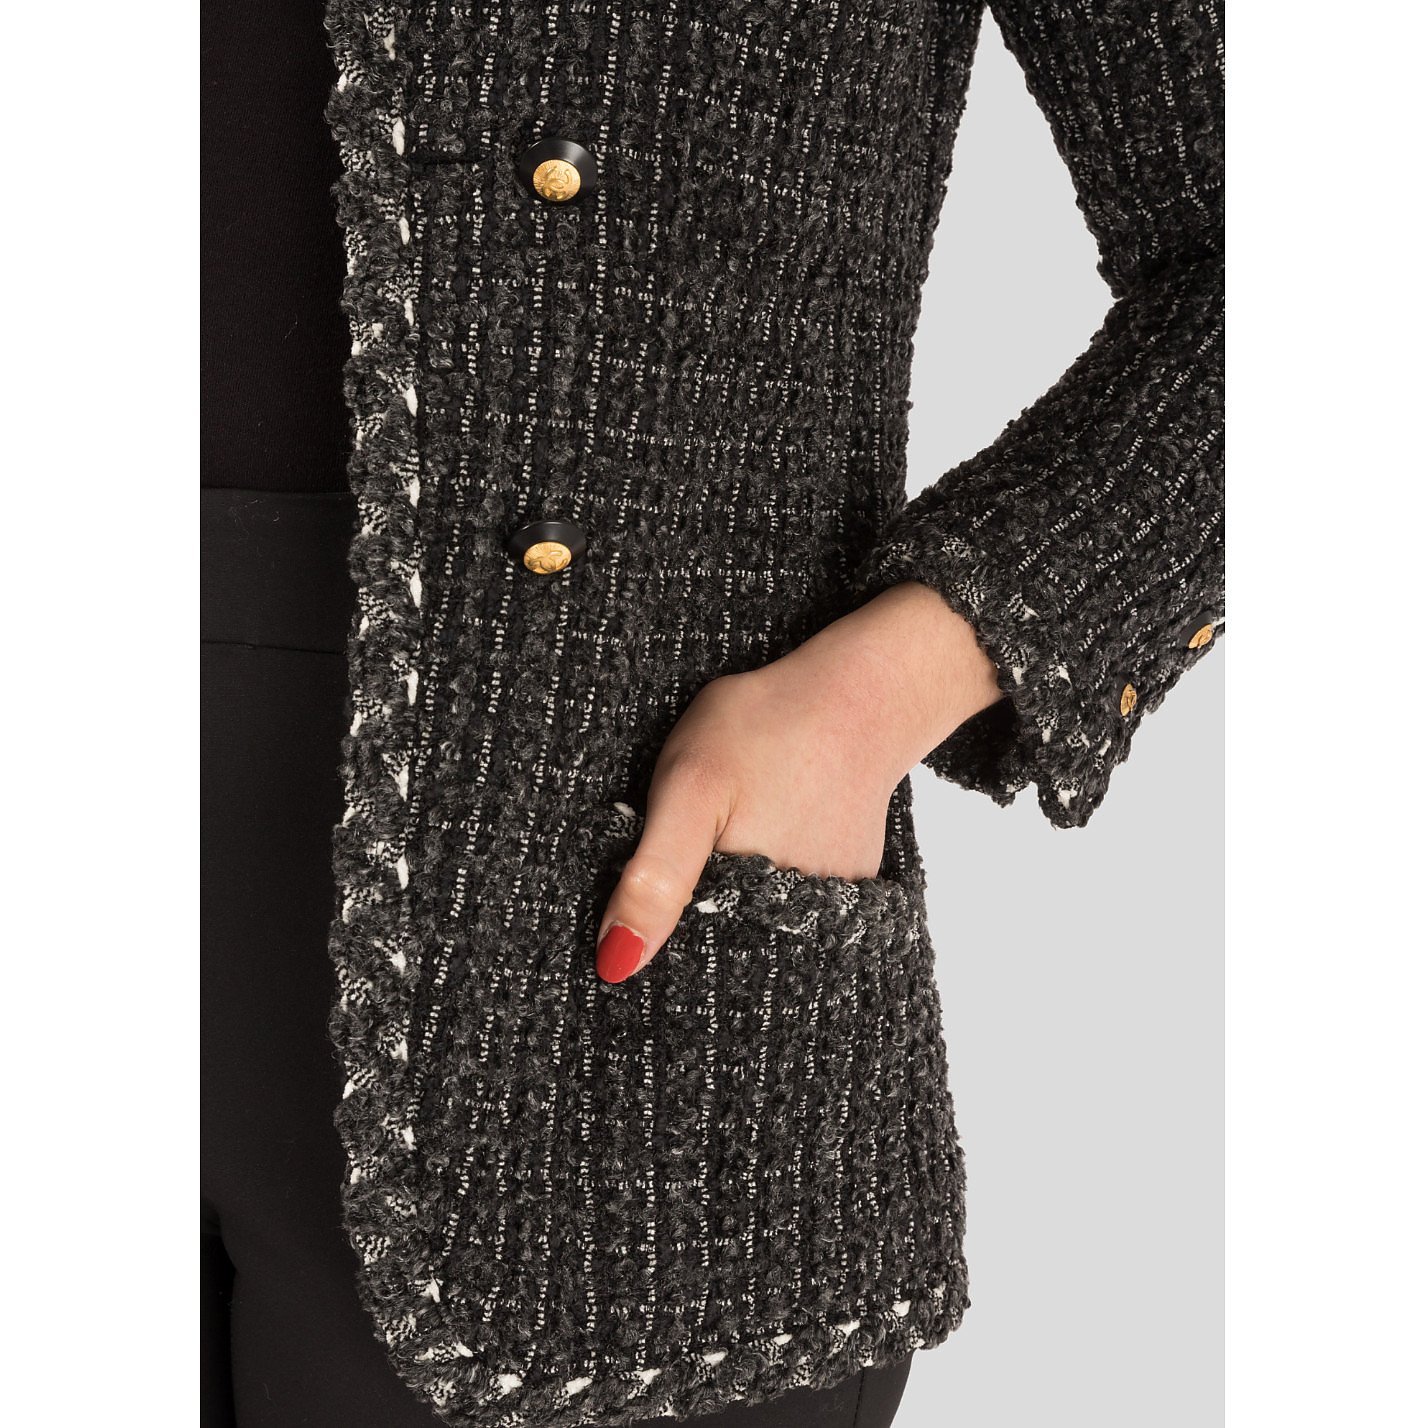 Chanel Tweed Jacket  Chanel jacket Chanel tweed jacket Costumes for women